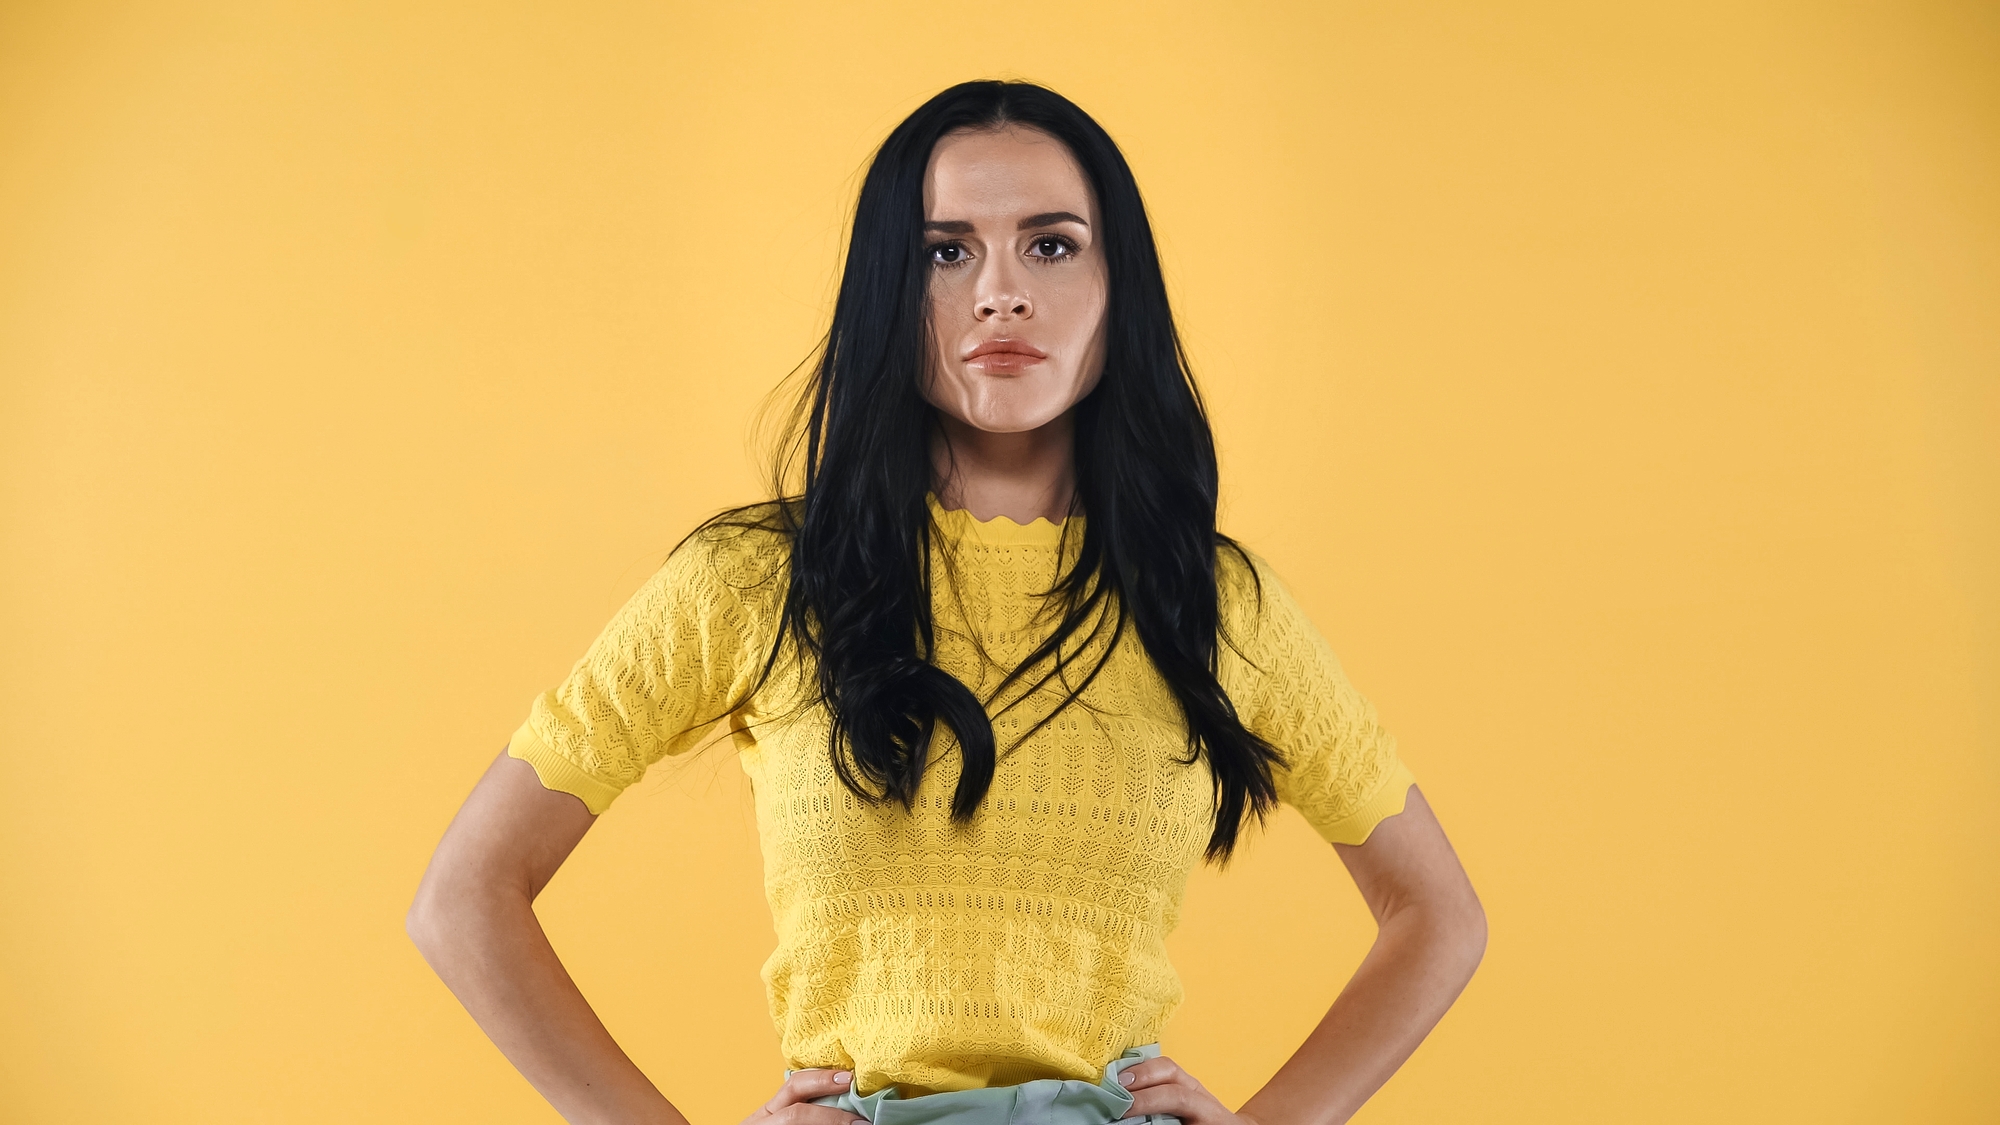 A person with long dark hair stands against a bright yellow background. They are wearing a yellow short-sleeved top and have their hands on their hips. Their expression is serious.